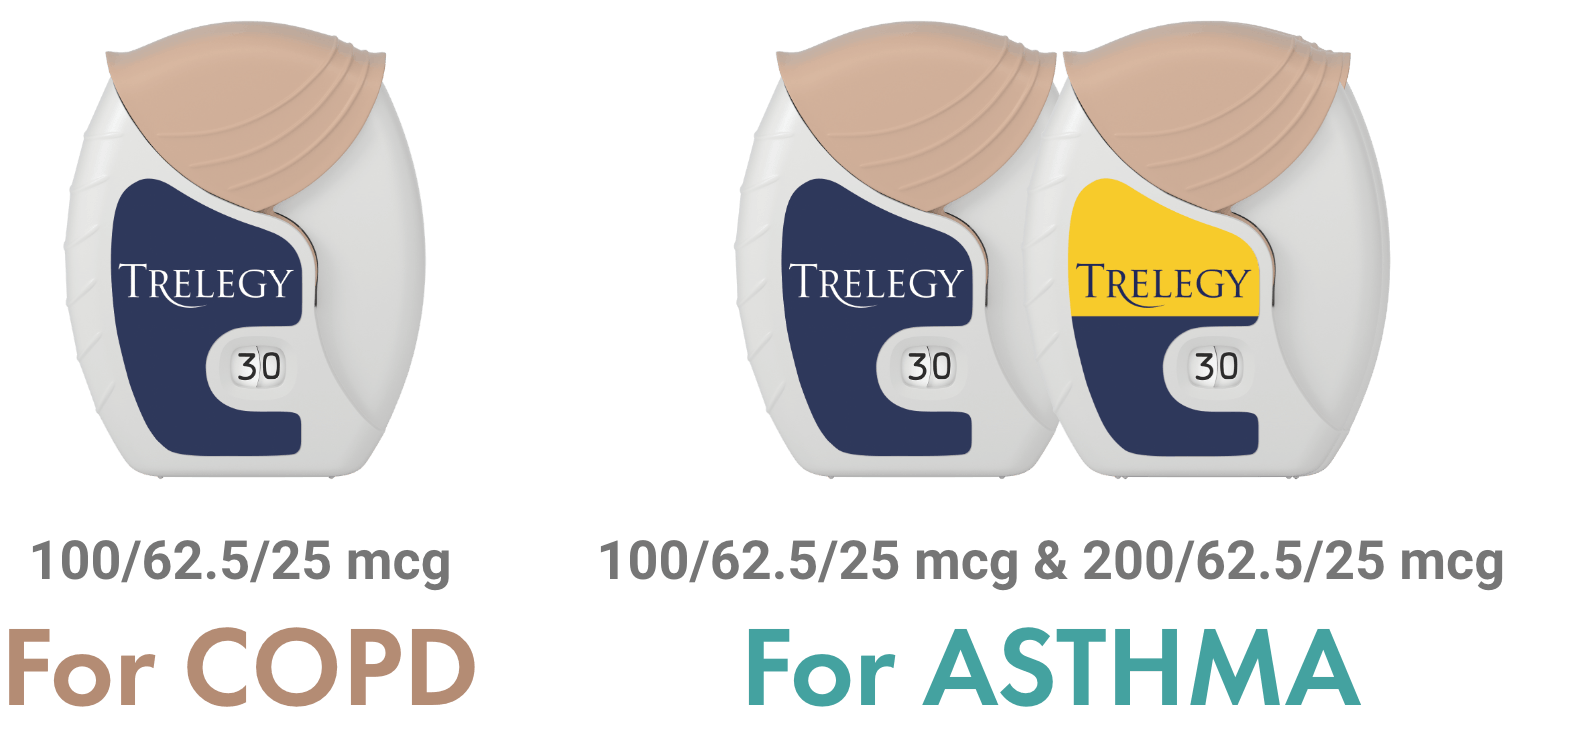 TRELEGY for COPD and for ASTHMA inhalers